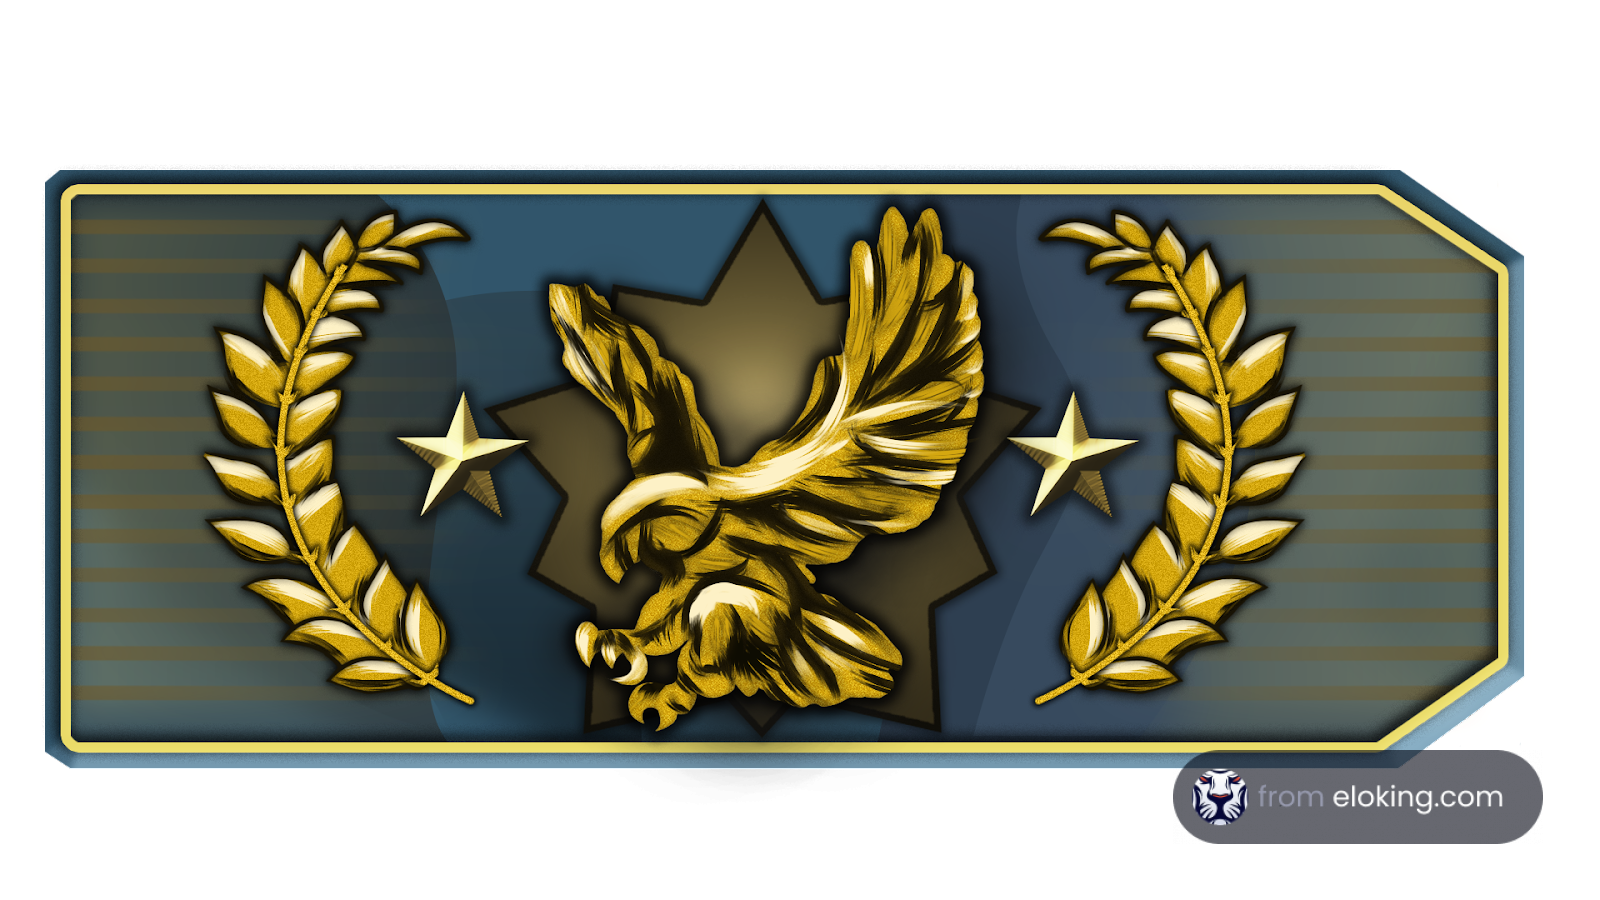 Golden eagle with wings spread, surrounded by golden laurel wreaths and stars on a military badge